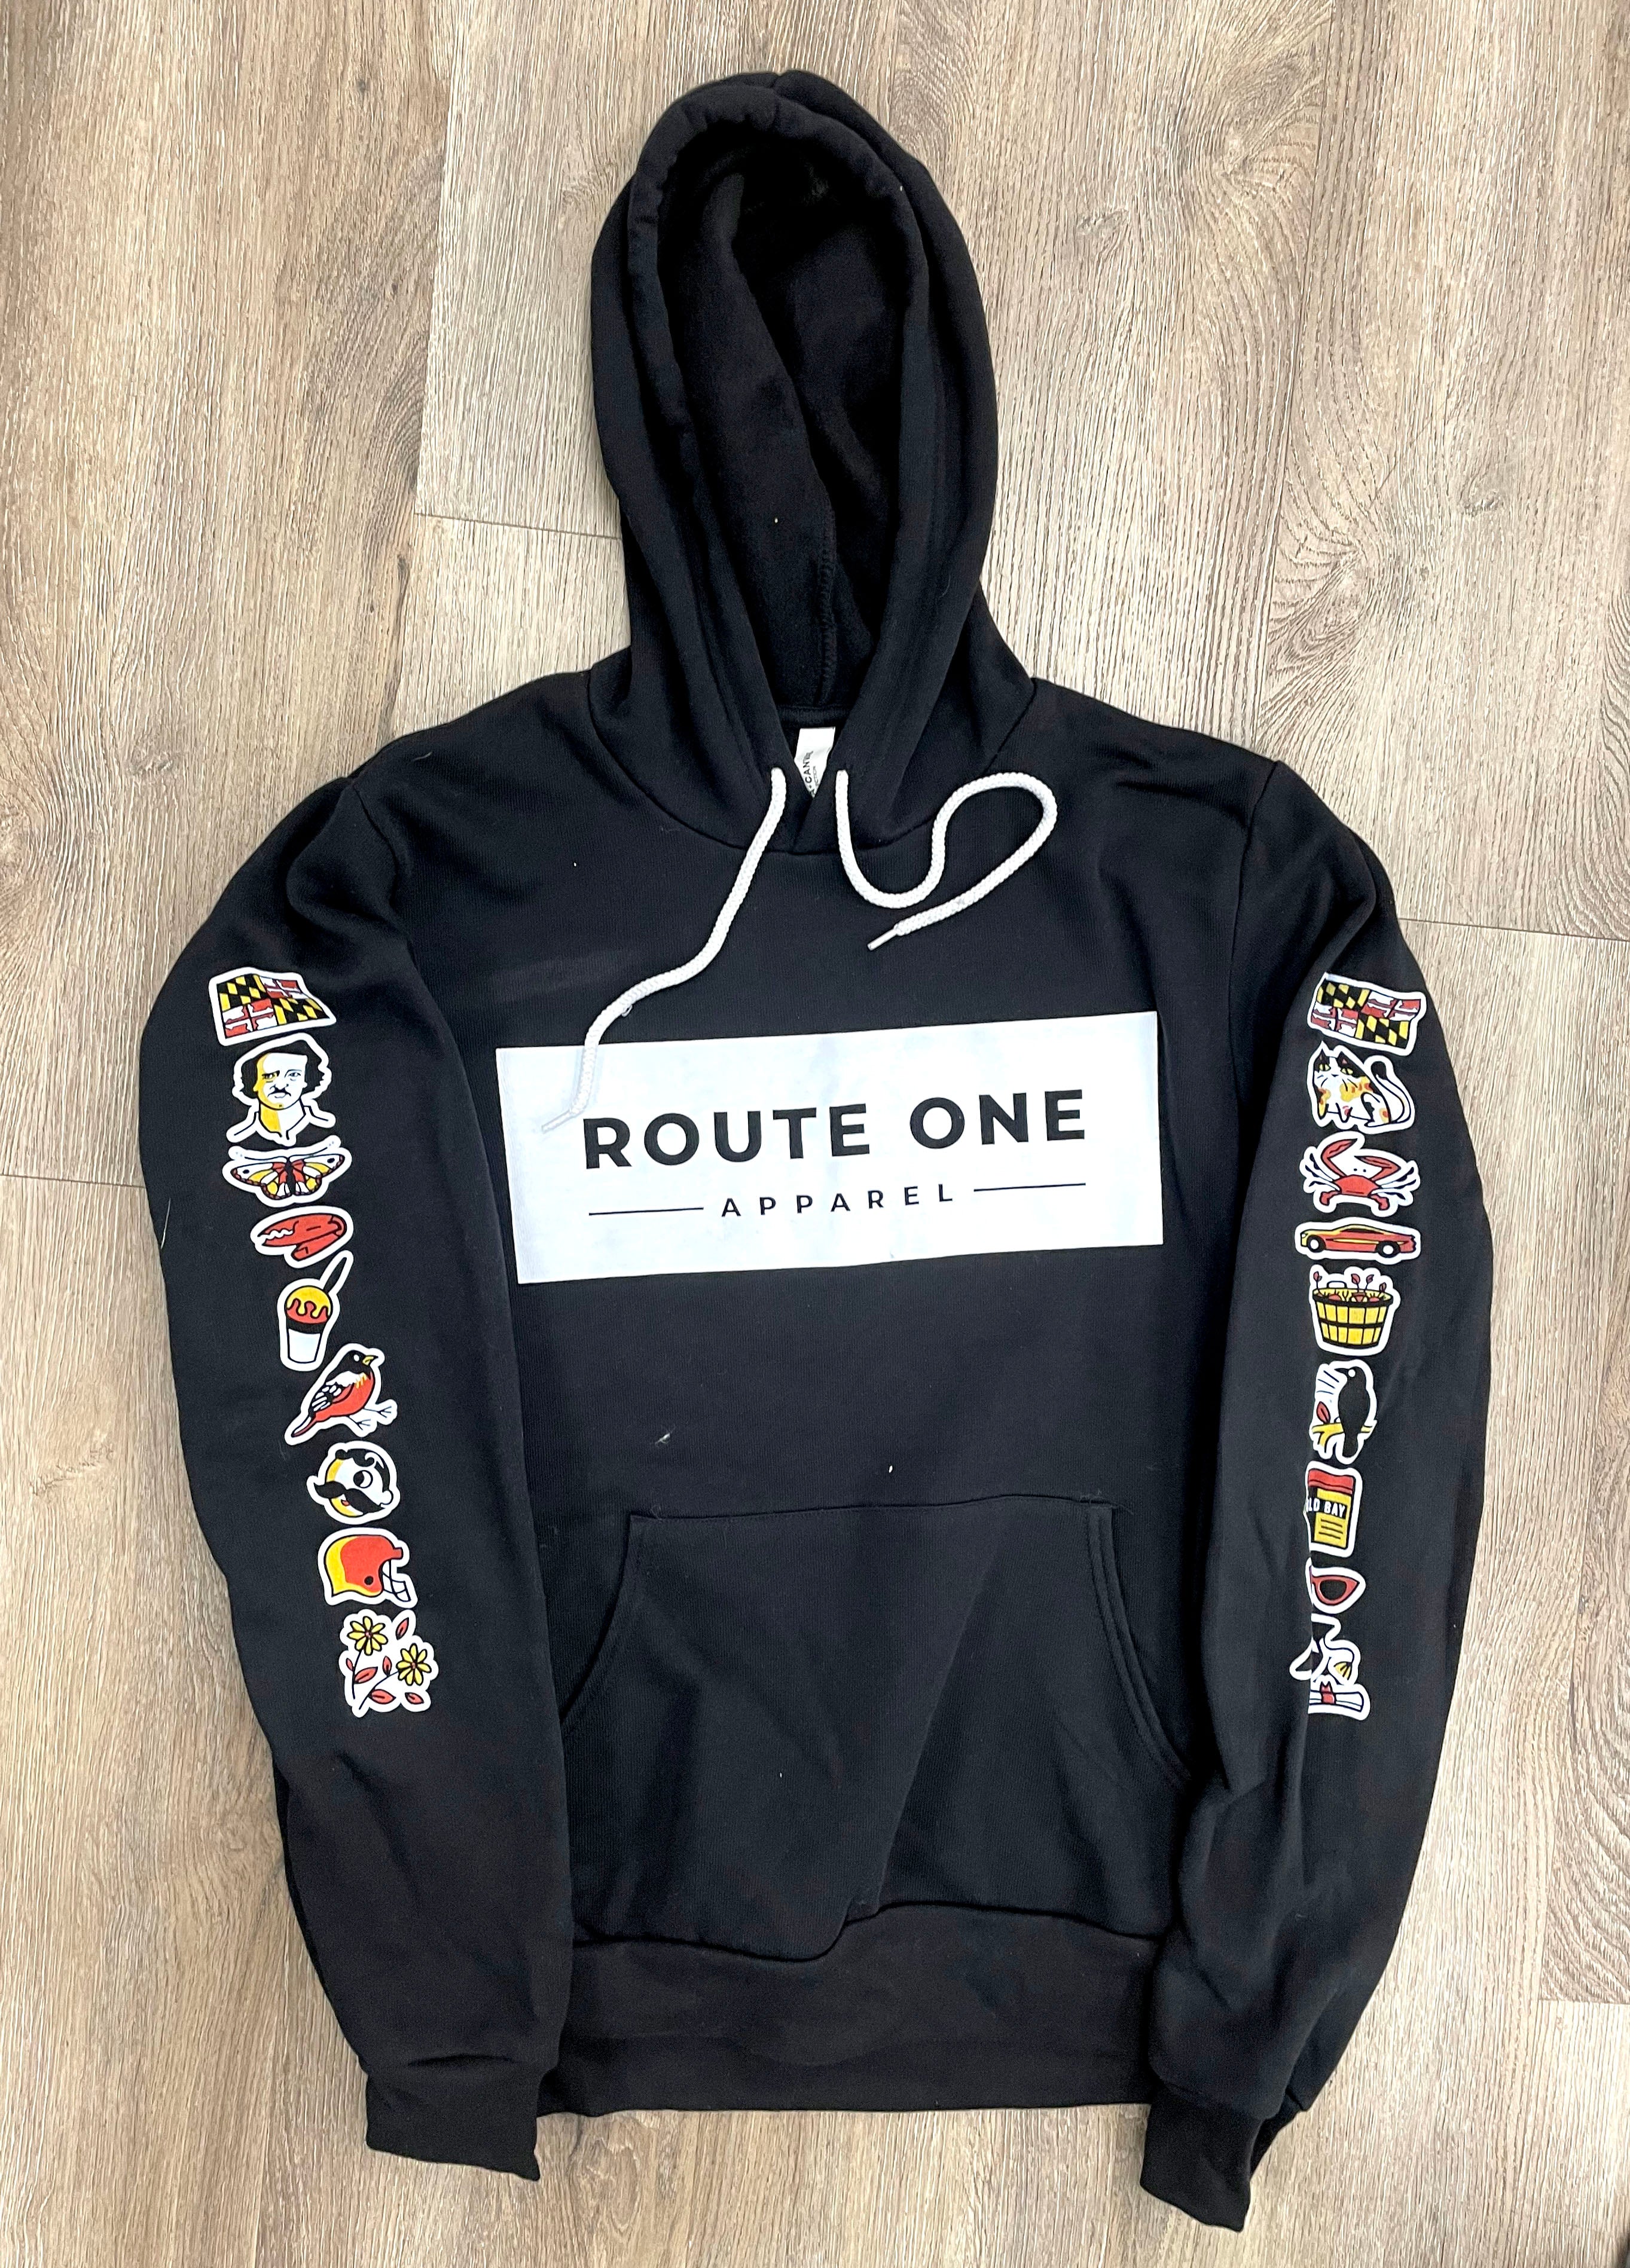 Maryland Statements - Route One Apparel (Black) / Hoodie - Route One Apparel